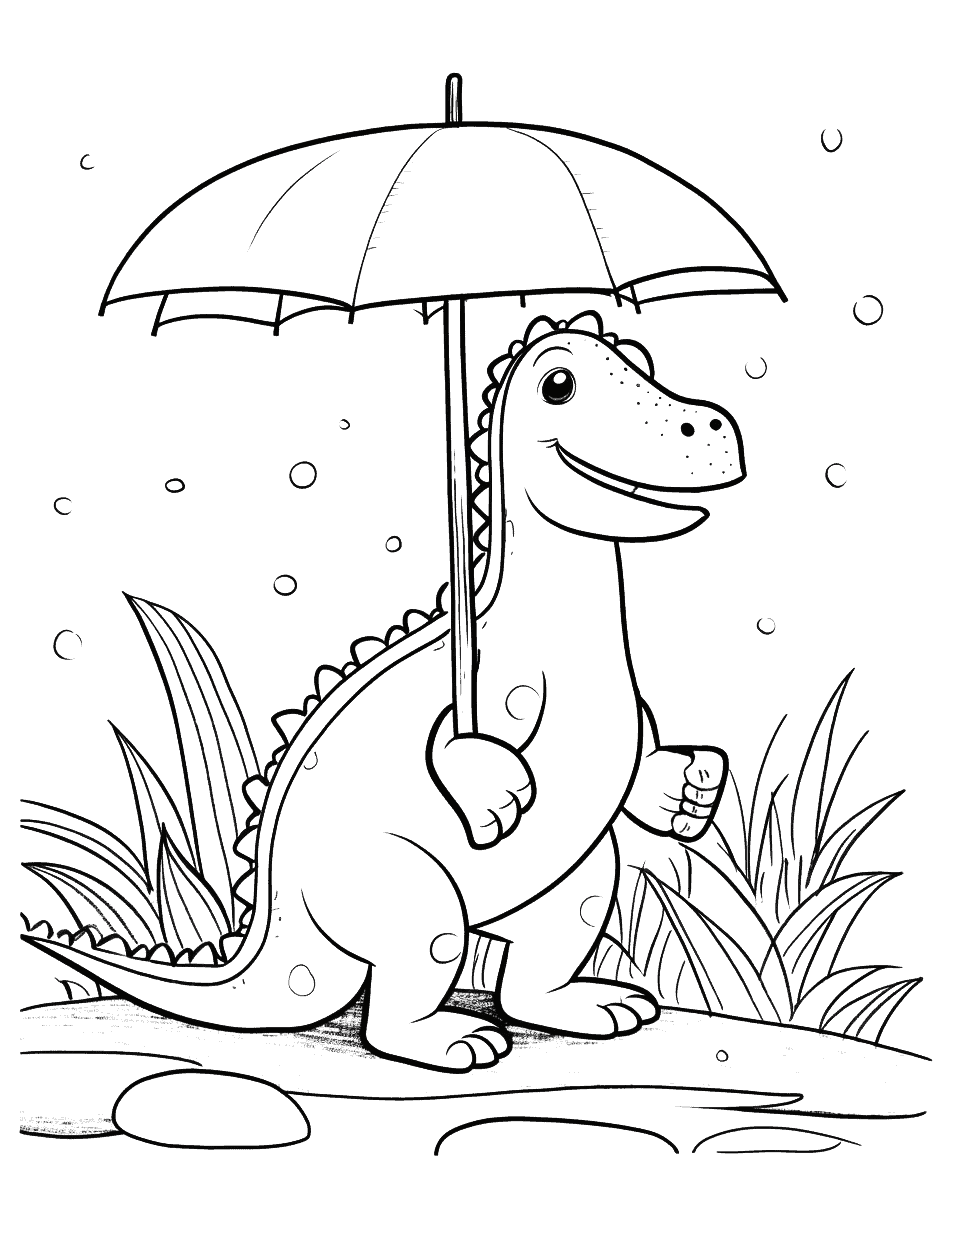 Baryonyx Holding an Umbrella Coloring Page - A Baryonyx hunting in a swamp during a rainstorm using an umbrella.